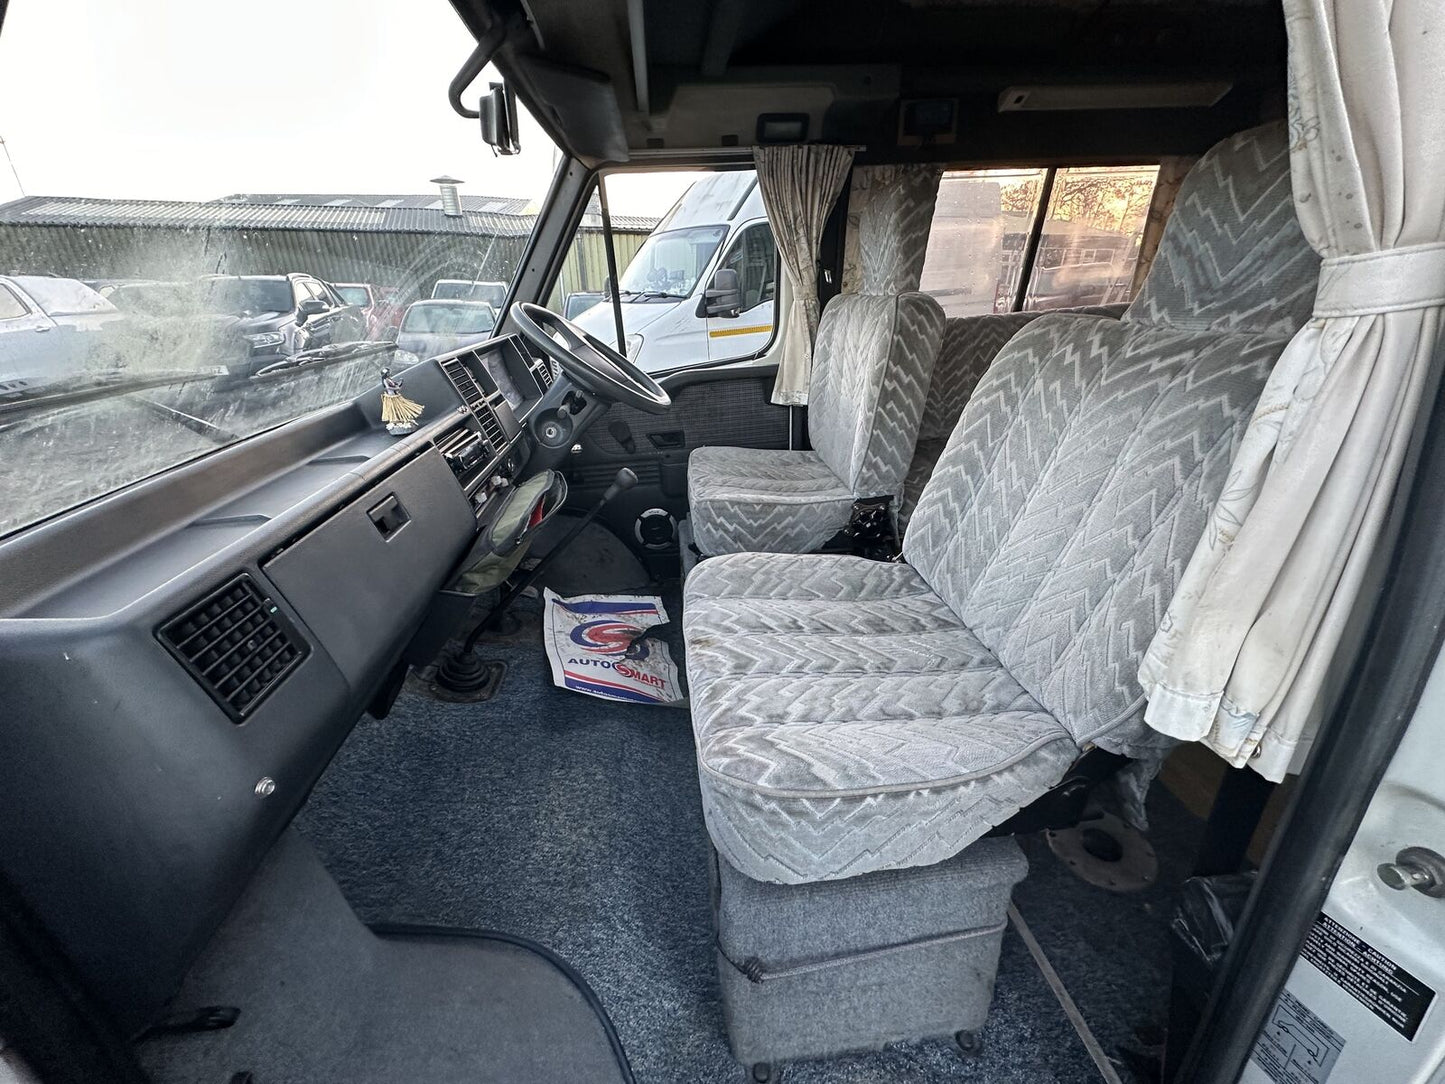 Bid on VINTAGE ADVENTURE: 1992 FIAT TALBOT EXPRESS 2.0L PETROL CAMPER- Buy &amp; Sell on Auction with EAMA Group